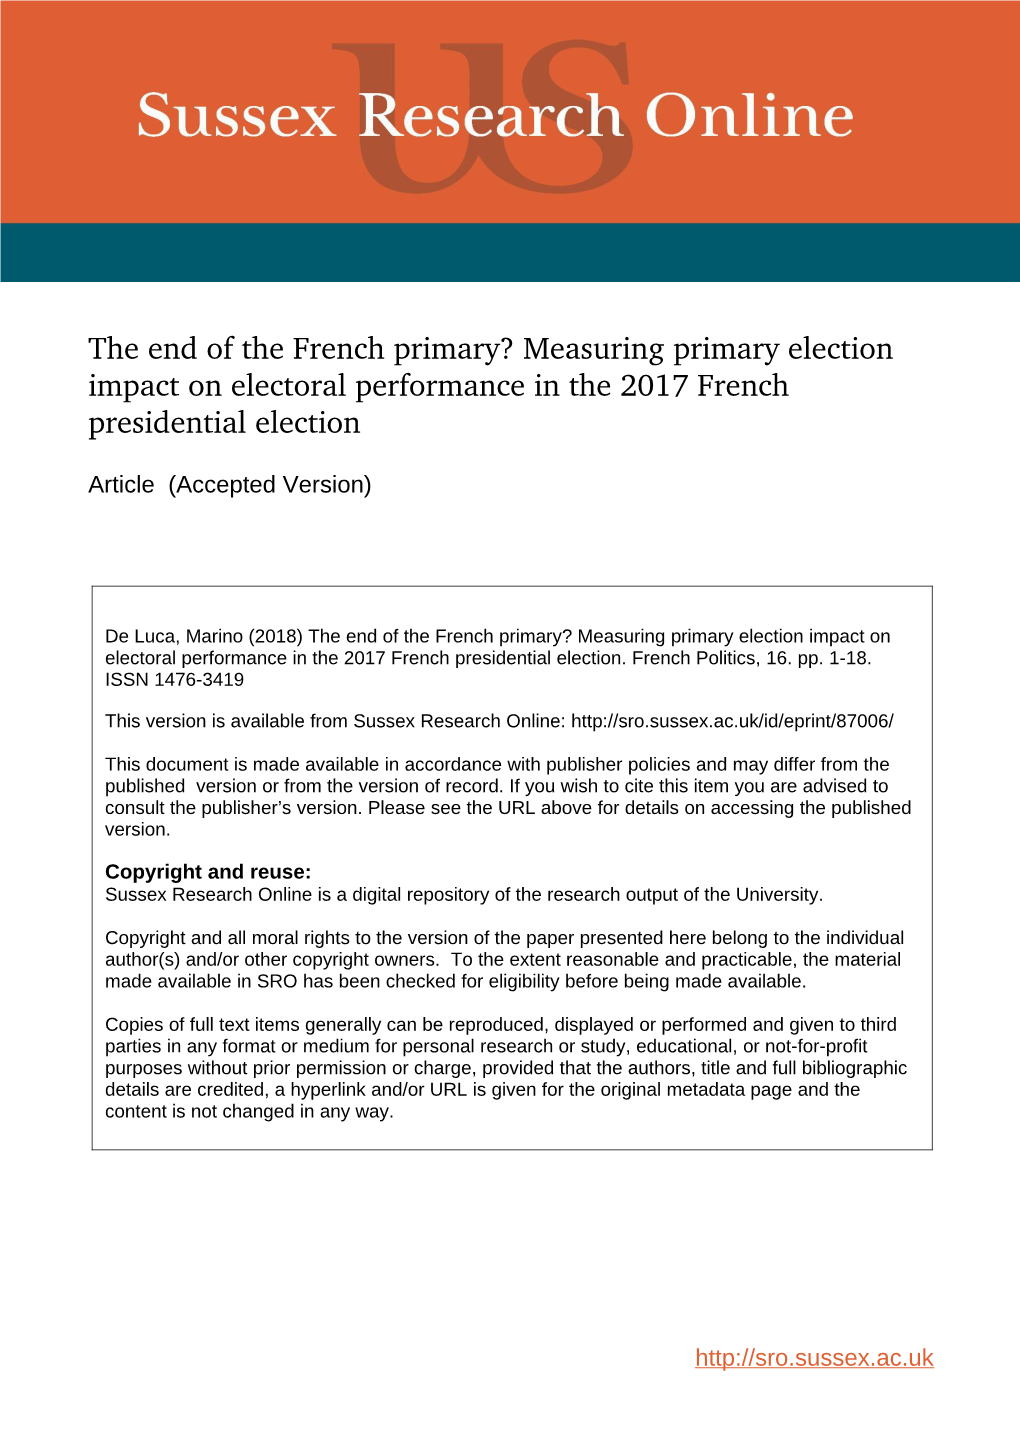 The End of the French Primary? Measuring Primary Election Impact on Electoral Performance in the 2017 French Presidential Election